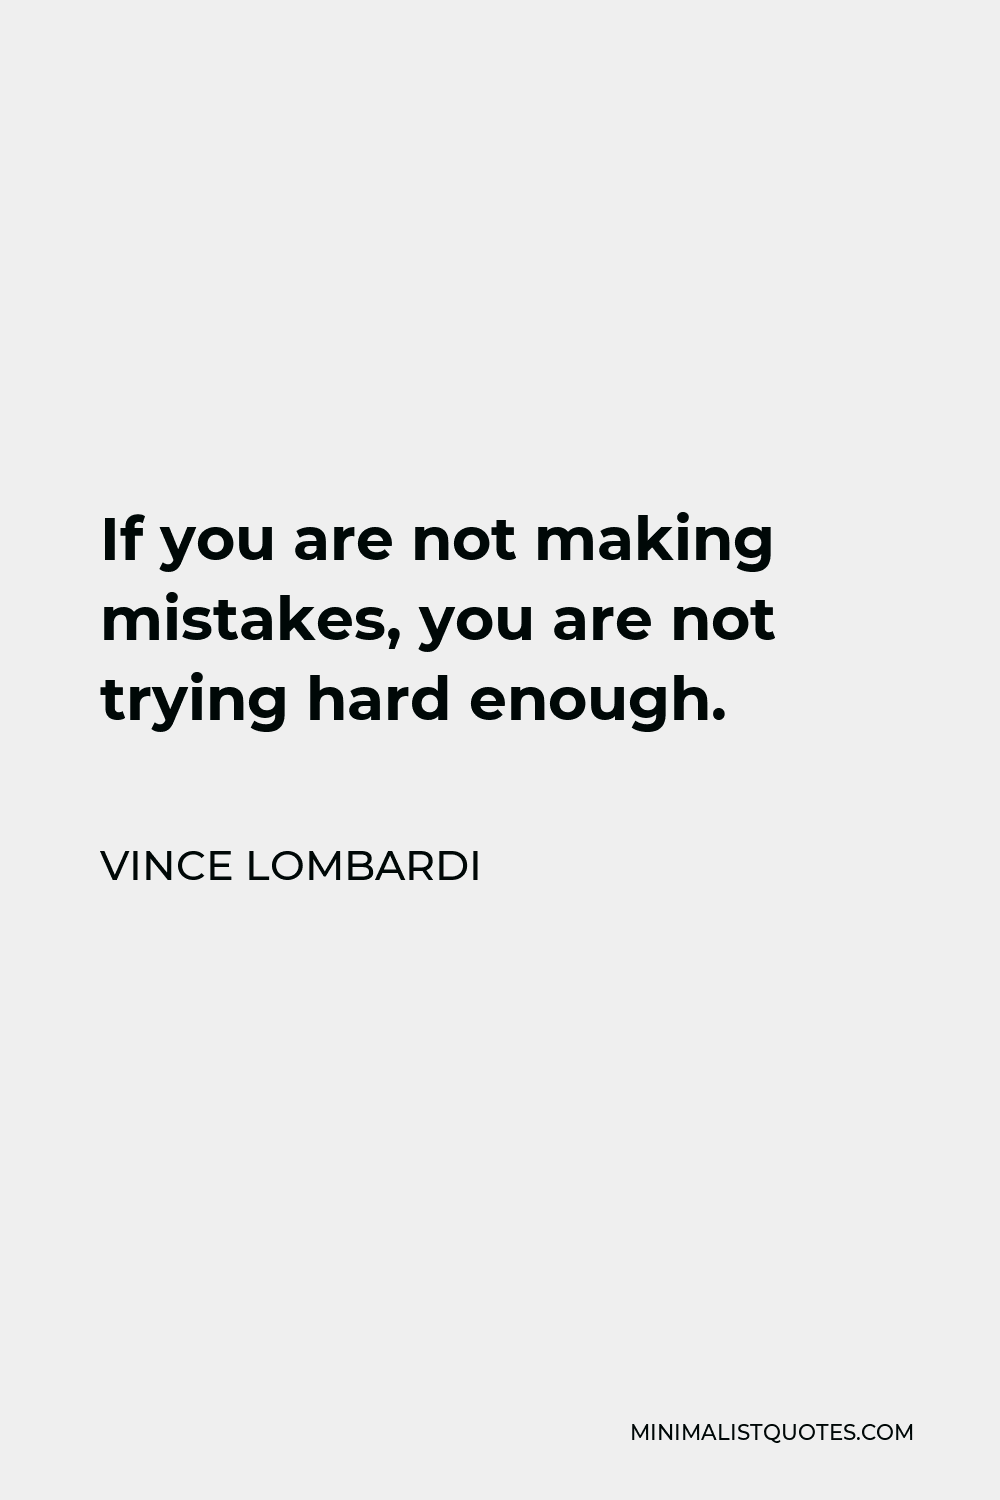 Vince Lombardi Quote - If you are not making mistakes, you are not trying hard enough.